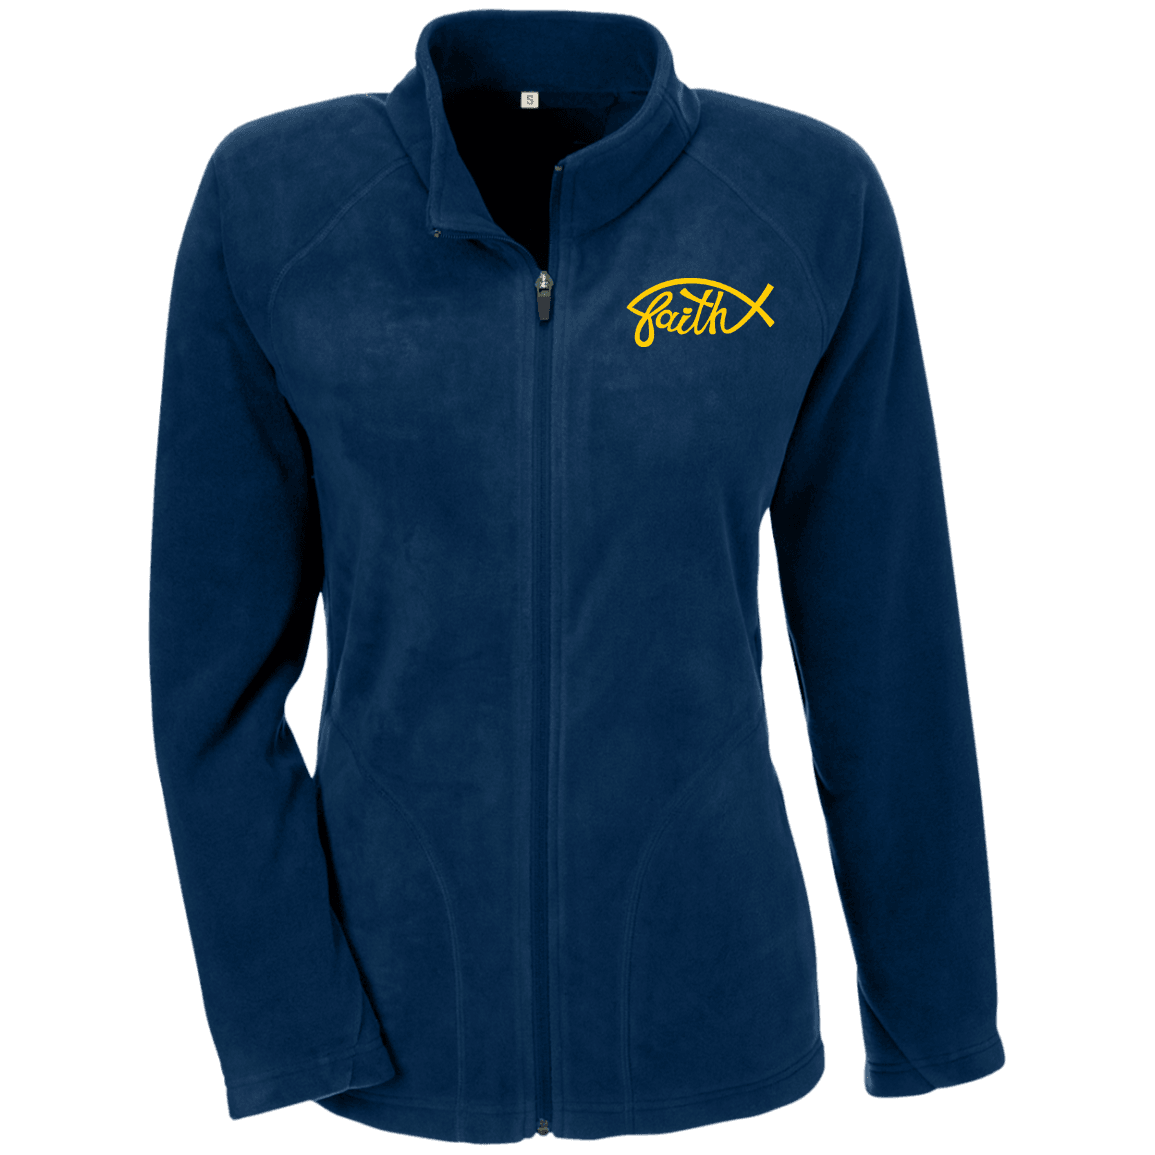 Designs by MyUtopia Shout Out:Faith Fish Embroidered Team 365 Ladies' Microfleece Jacket - Navy Blue,Dark Navy / X-Small,Jackets